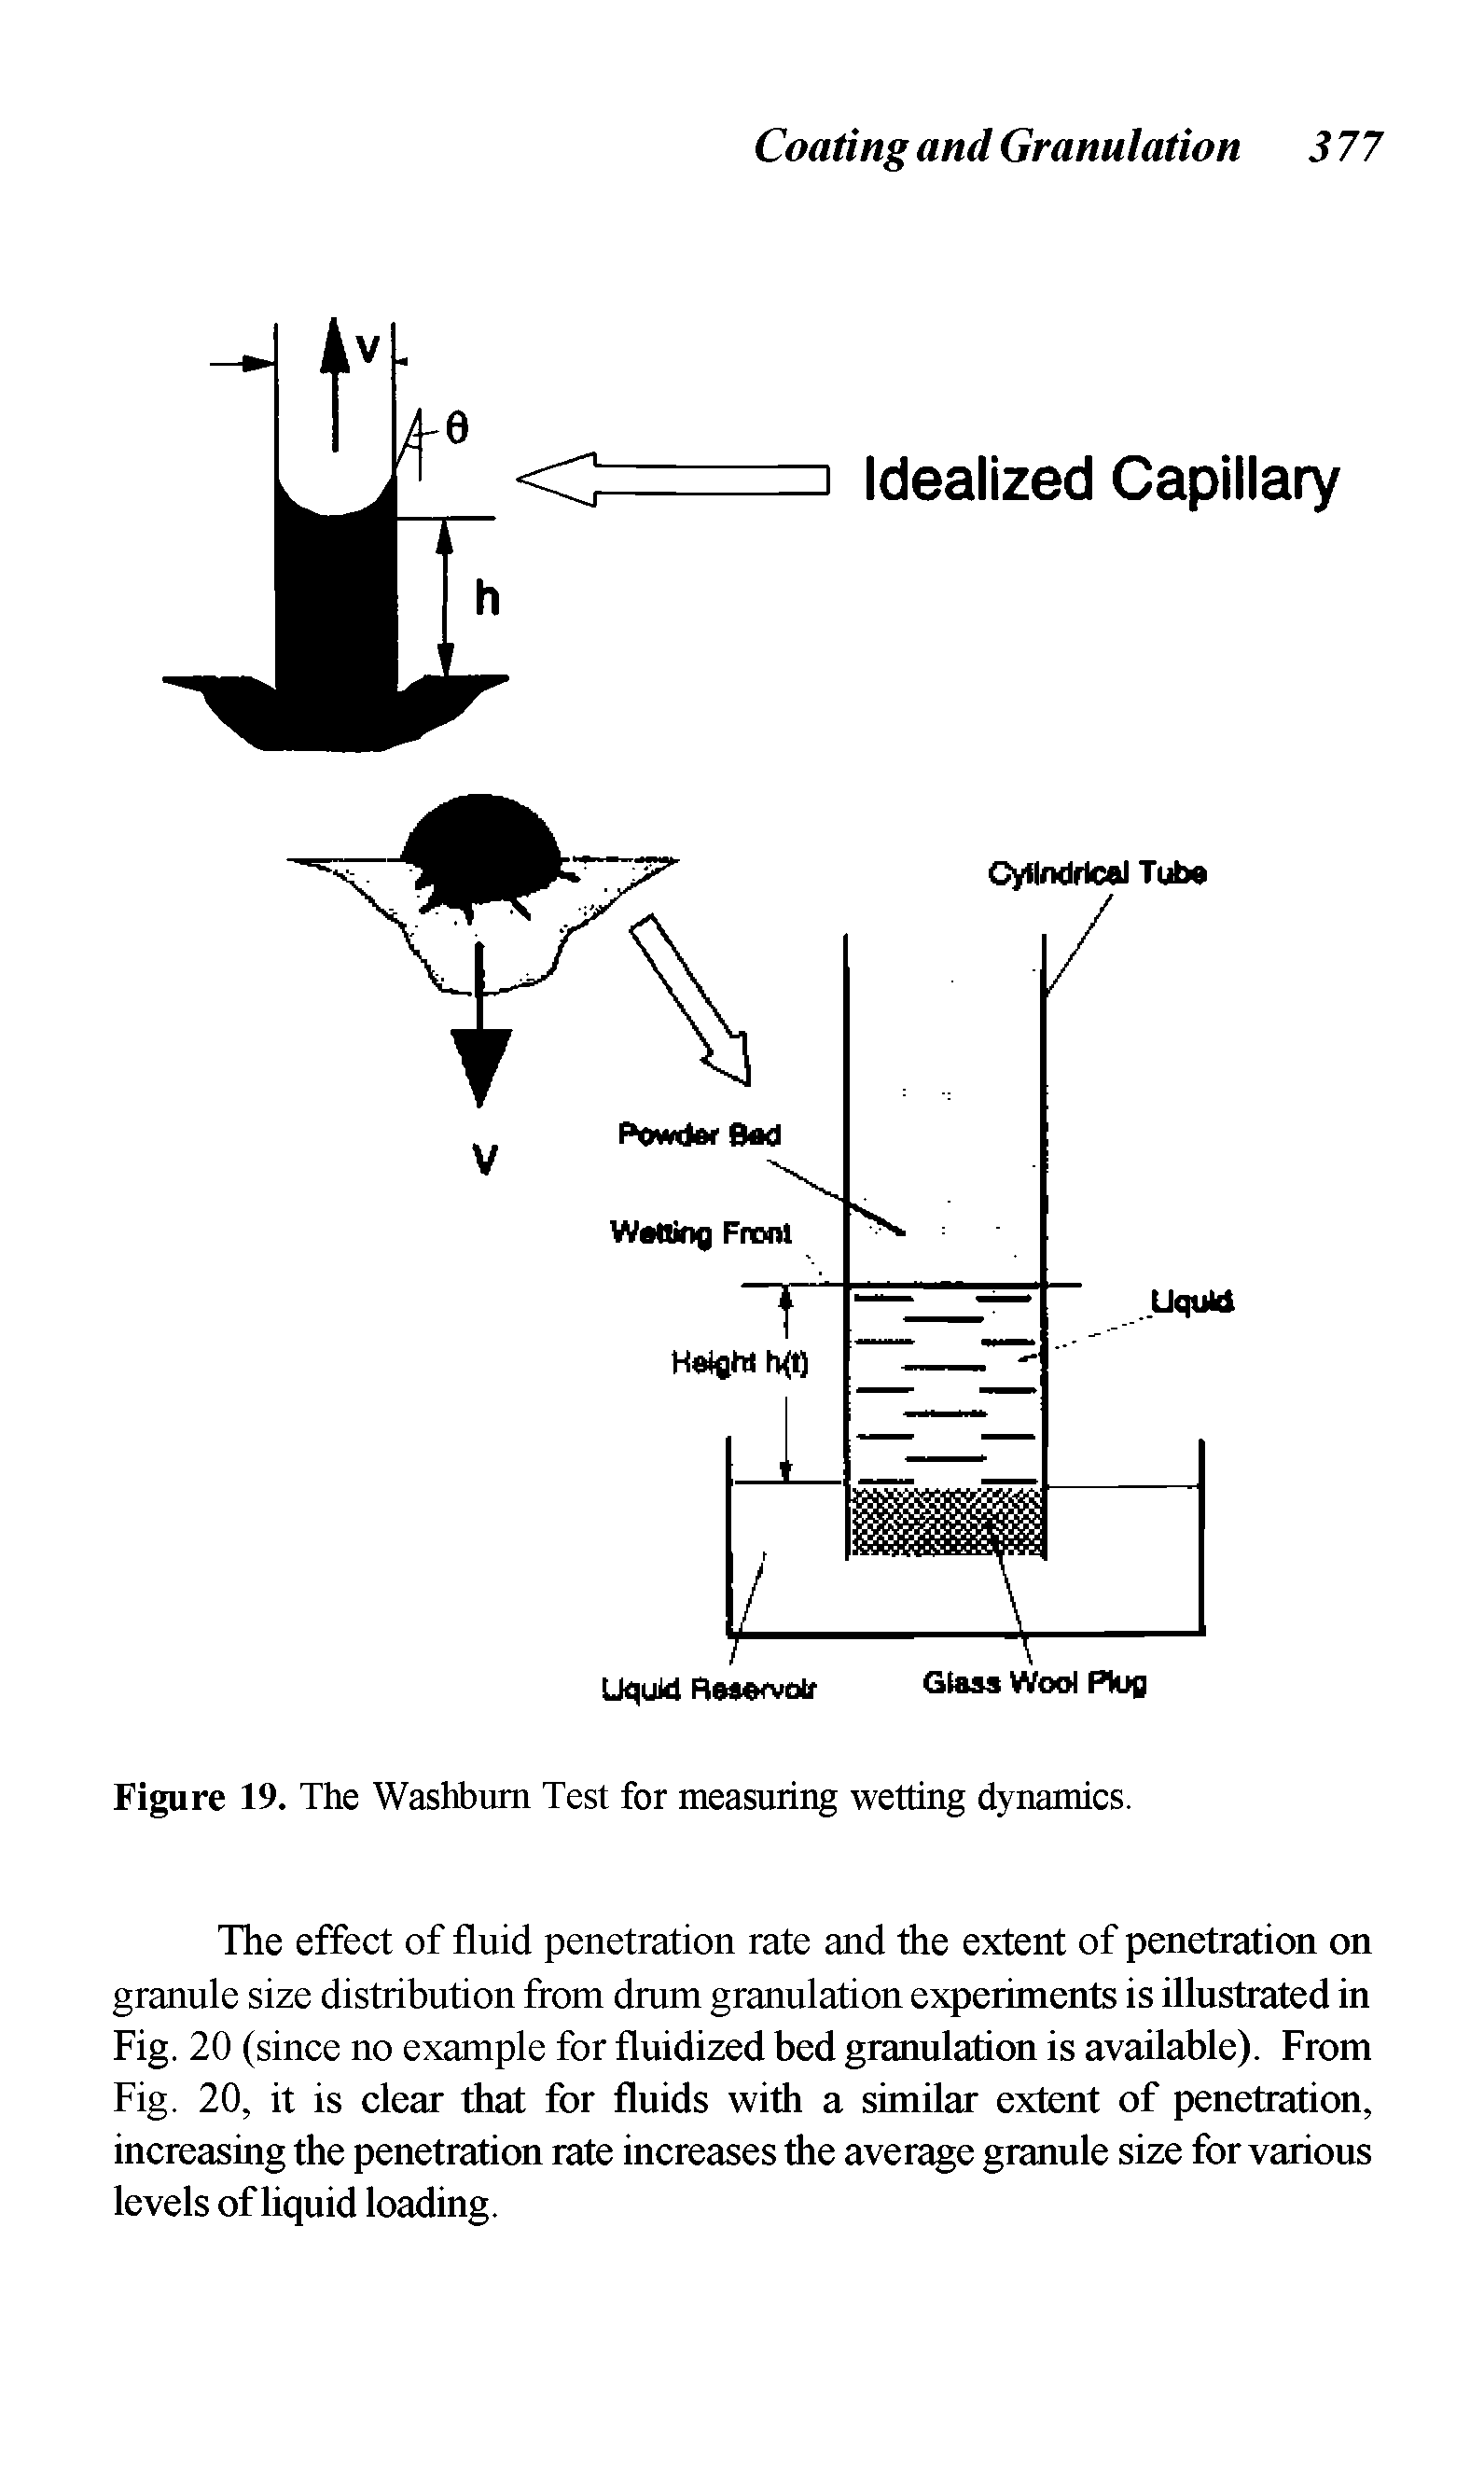 Figure 19. The Washburn Test for measuring wetting dynamics.